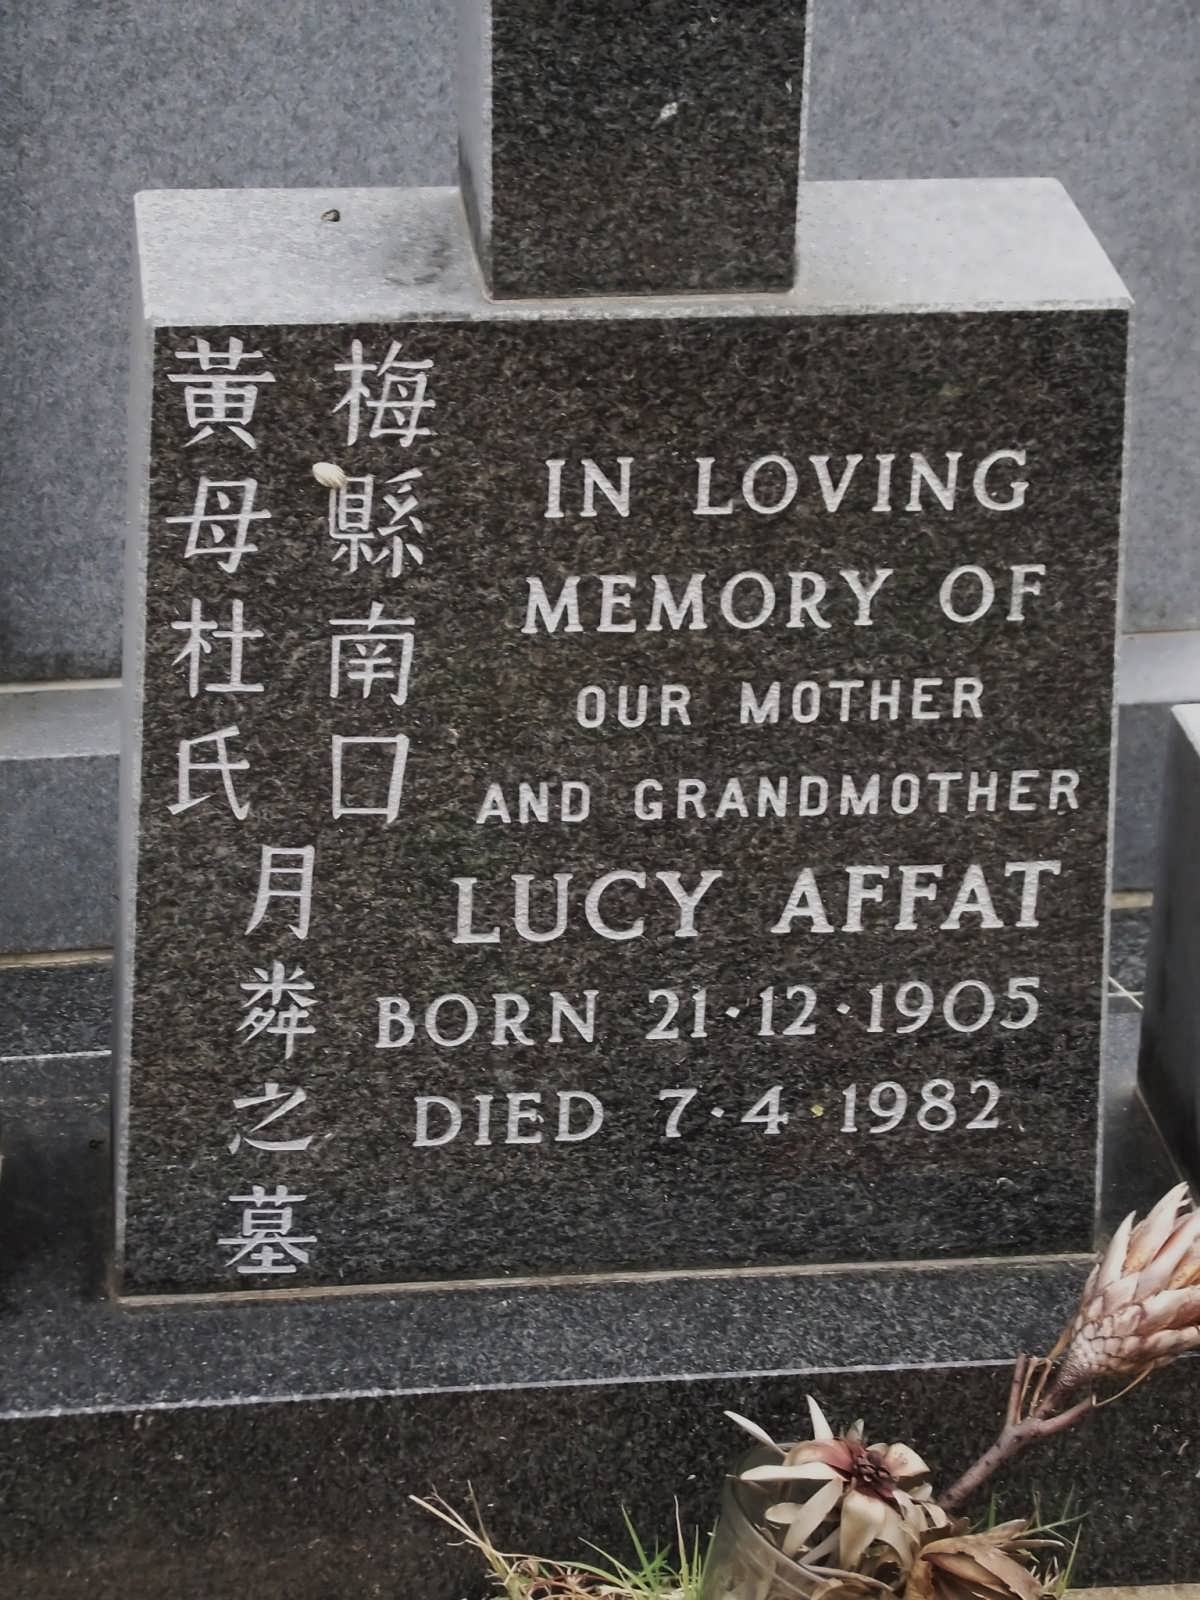 AFFAT Lucy 1905-1982